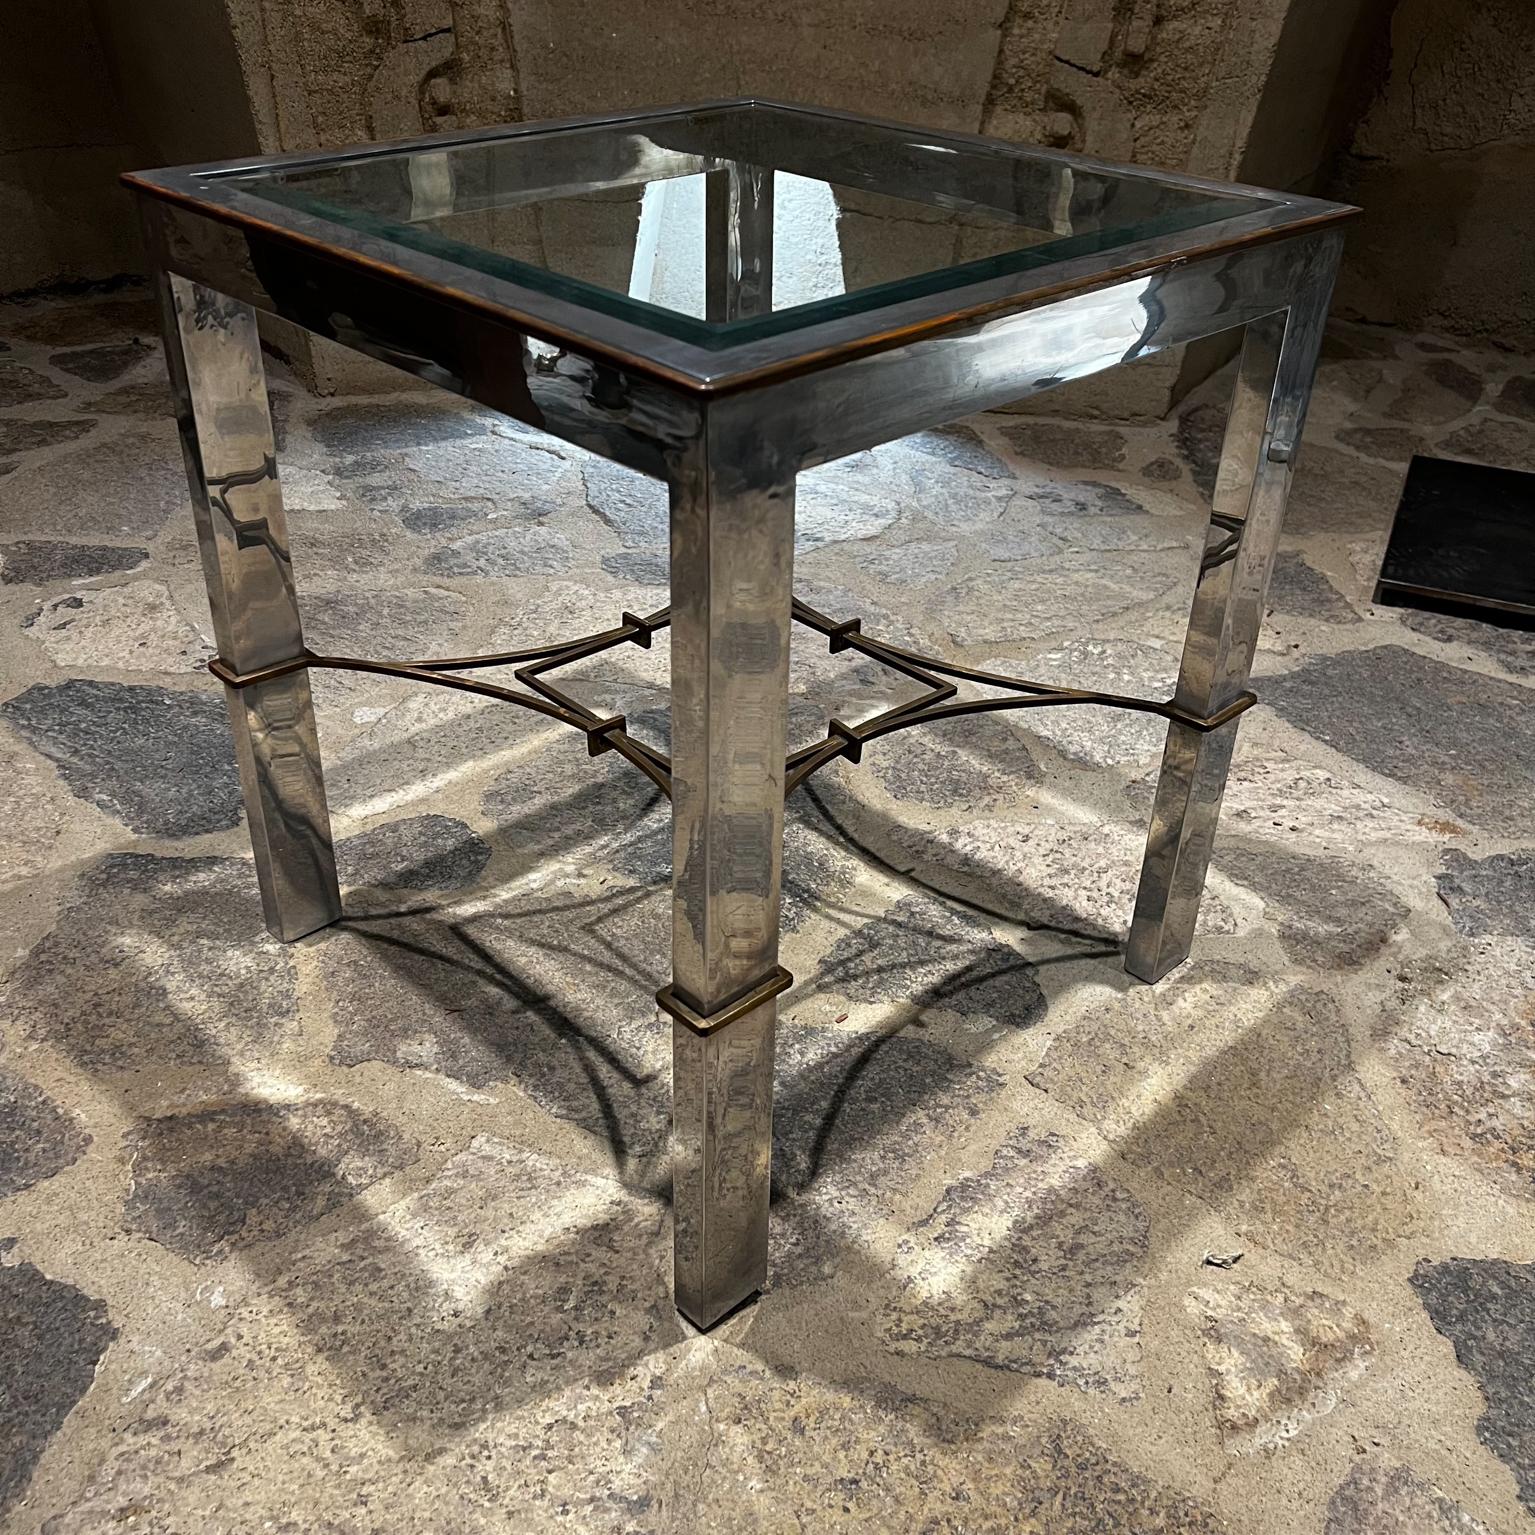 1960s Arturo Pani Modern Side Tables Aluminum and Bronze Mexico City For Sale 11